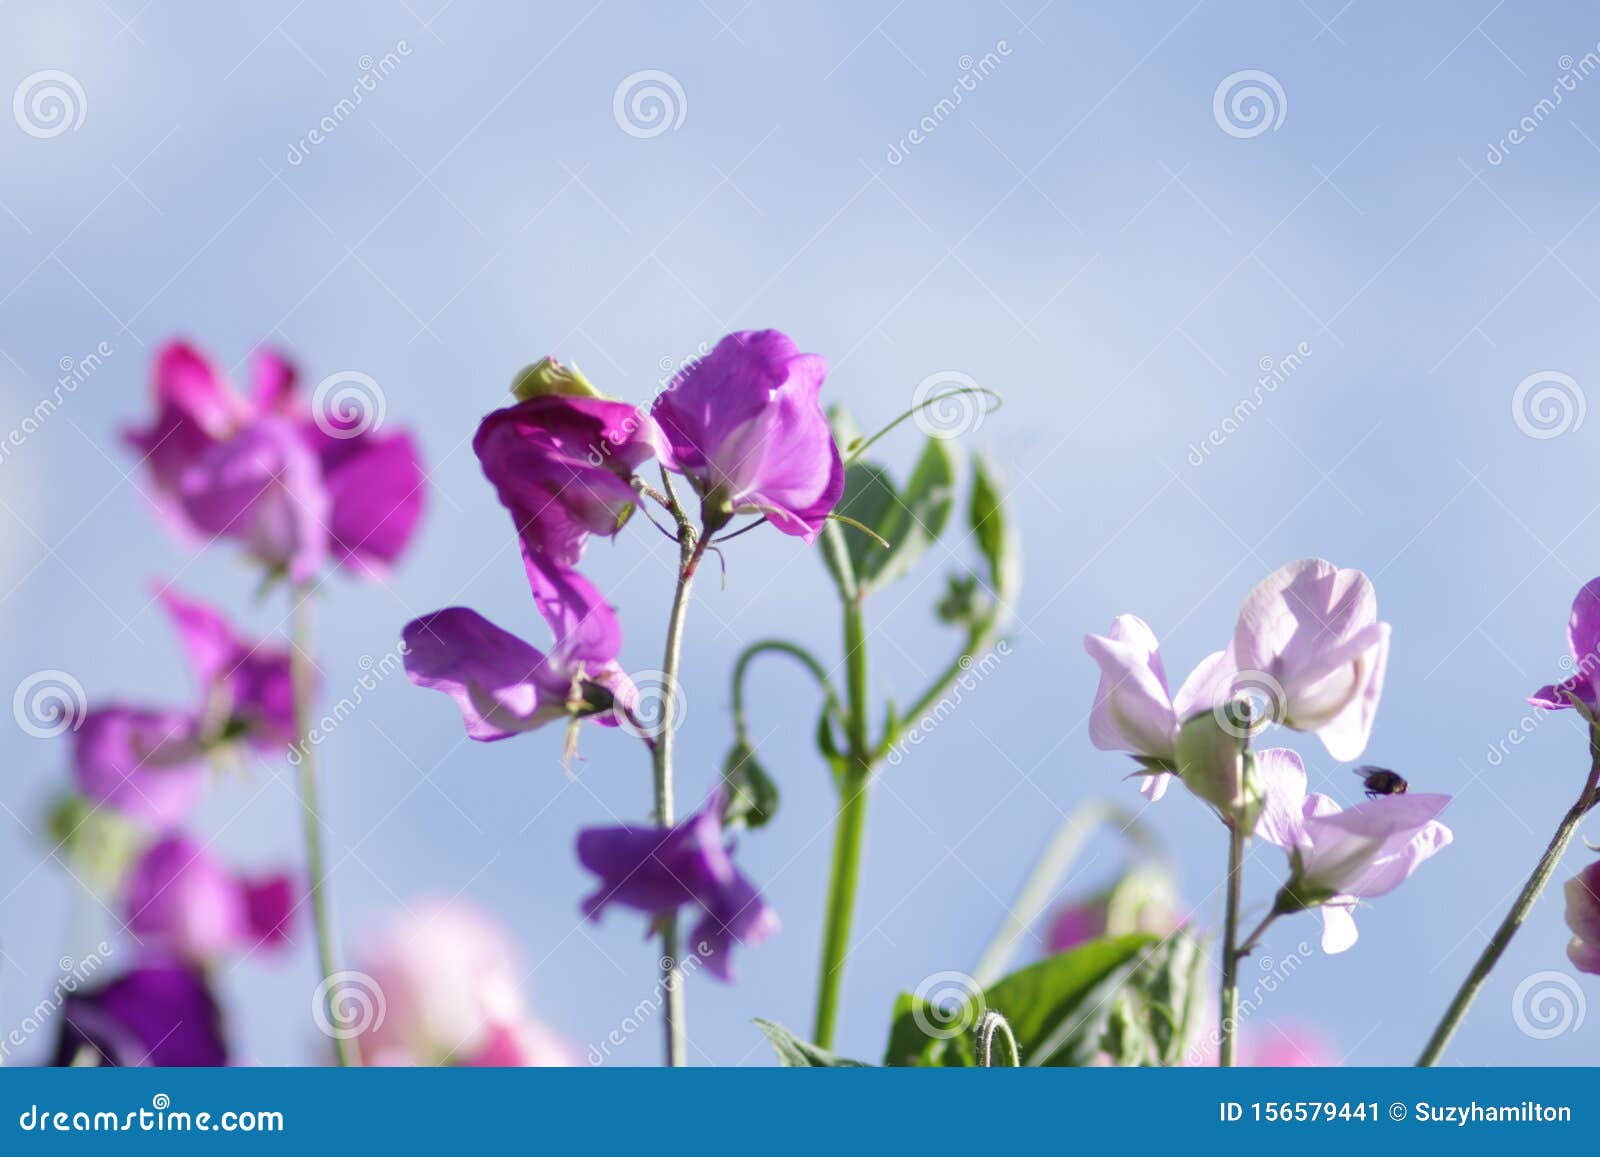 Sweet Pea Flowers Pastel Colours With Blue Sky Background Stock Image Image Of White Flower 156579441